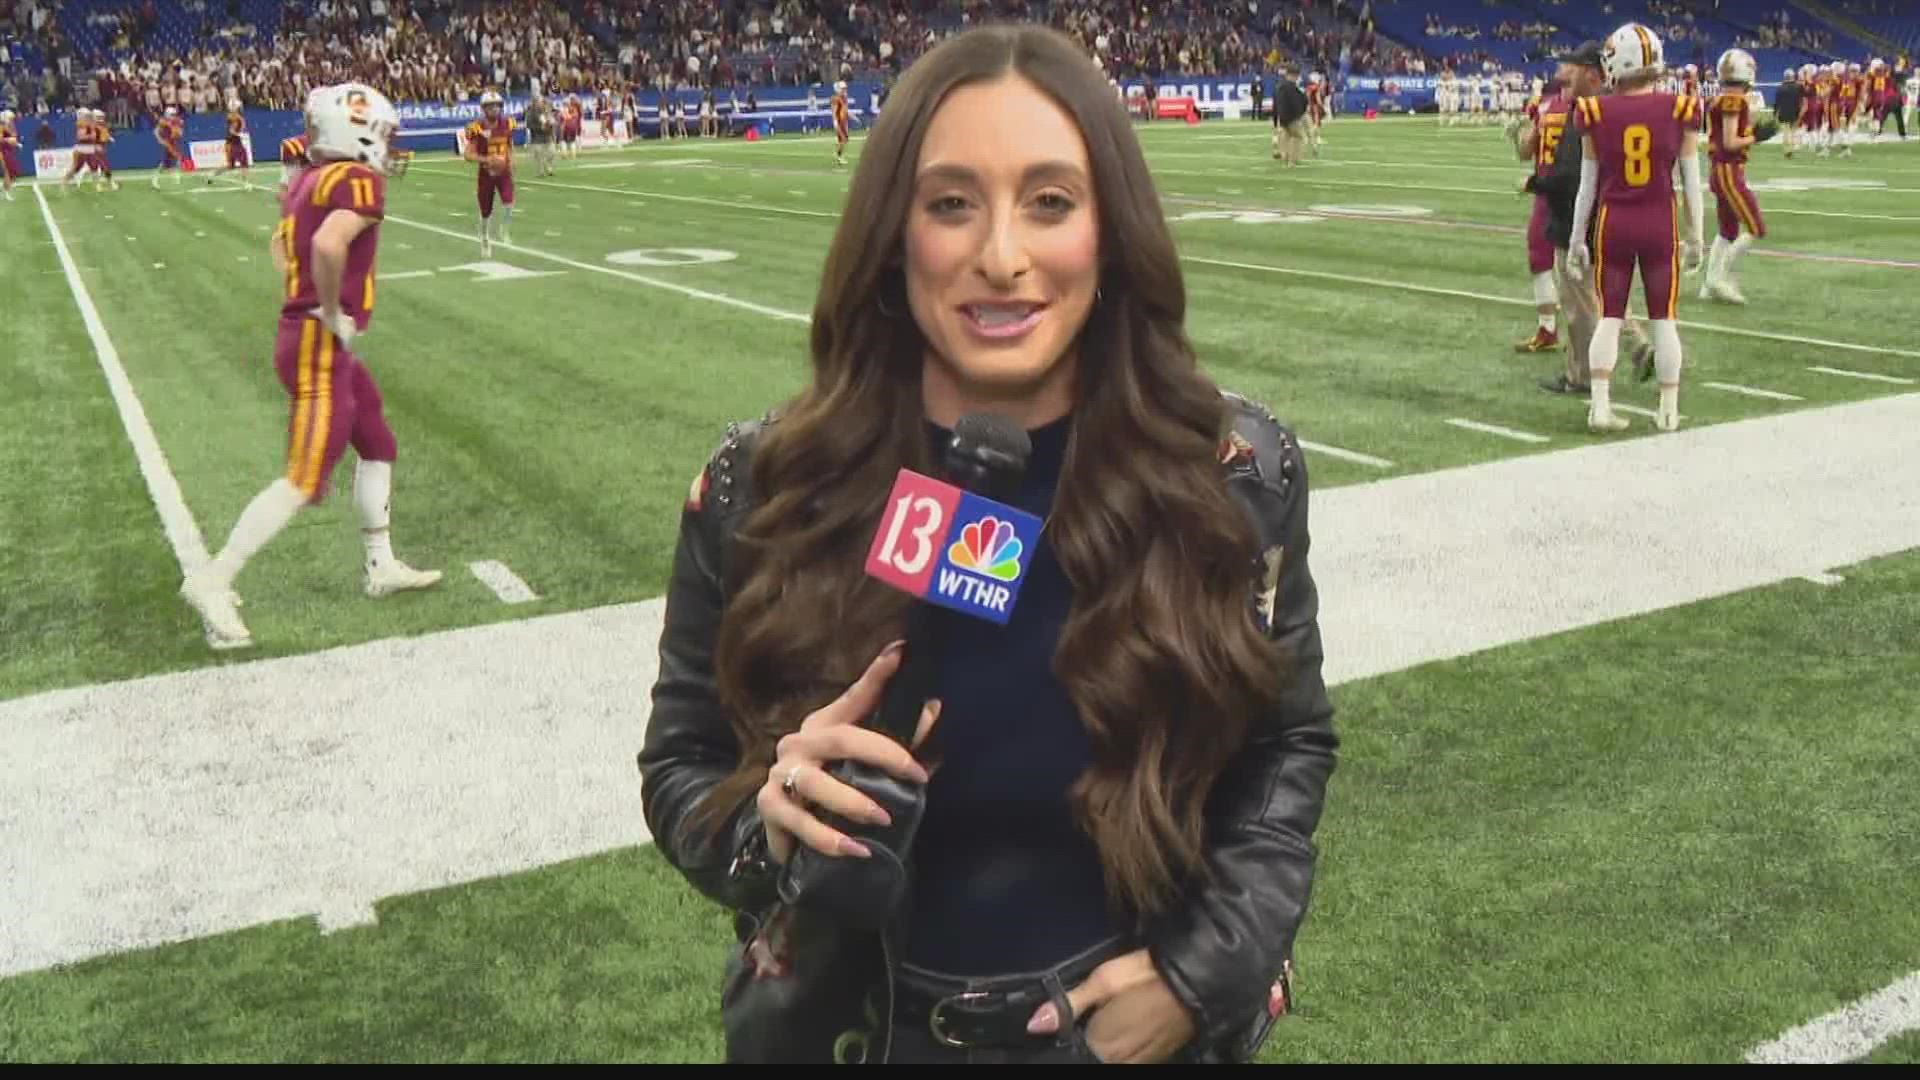 Six state titles will be handed out this weekend, and our Taylor Tannebaum is at Lucas Oil Stadium with the latest from Class A on.